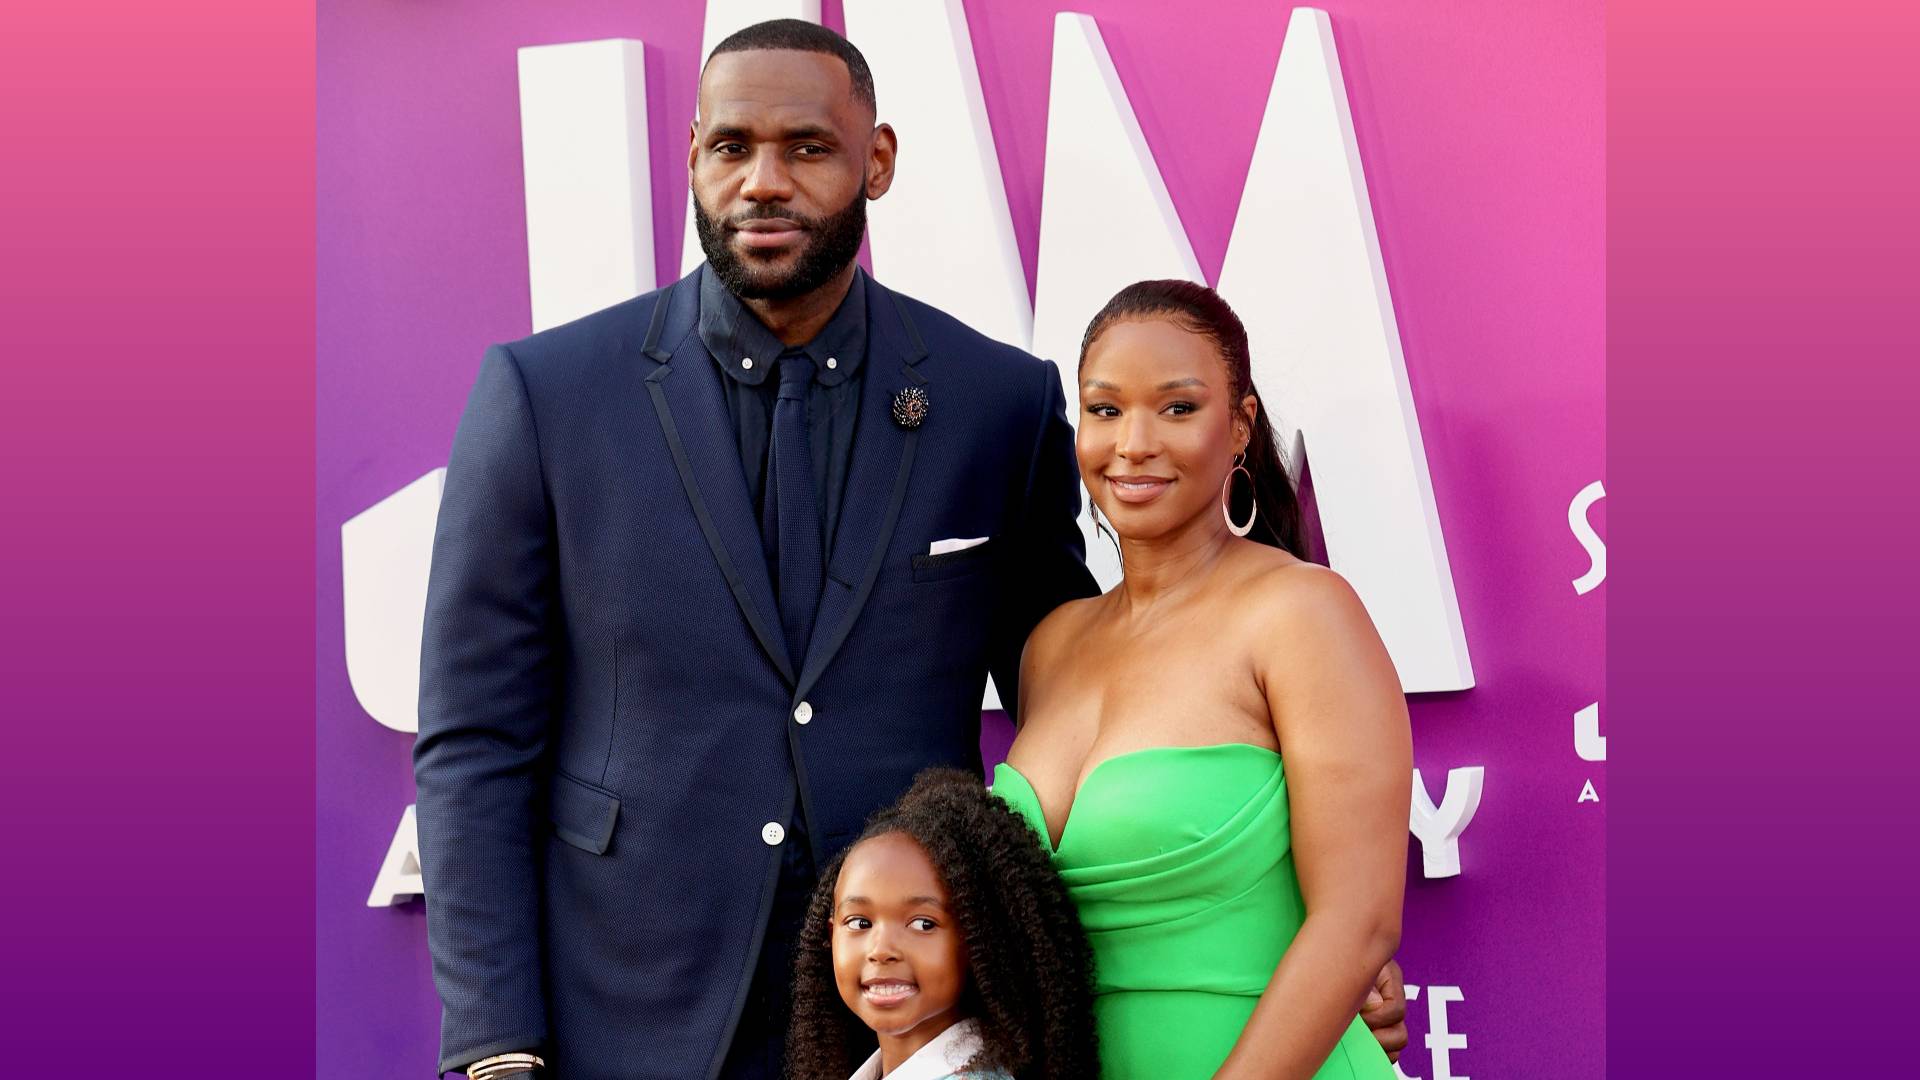 LeBron James, Zhuri Nova James, and Savannah Brinson attend the premiere of Warner Bros "Space Jam: A New Legacy" at Regal LA Live on July 12, 2021 in Los Angeles, California.